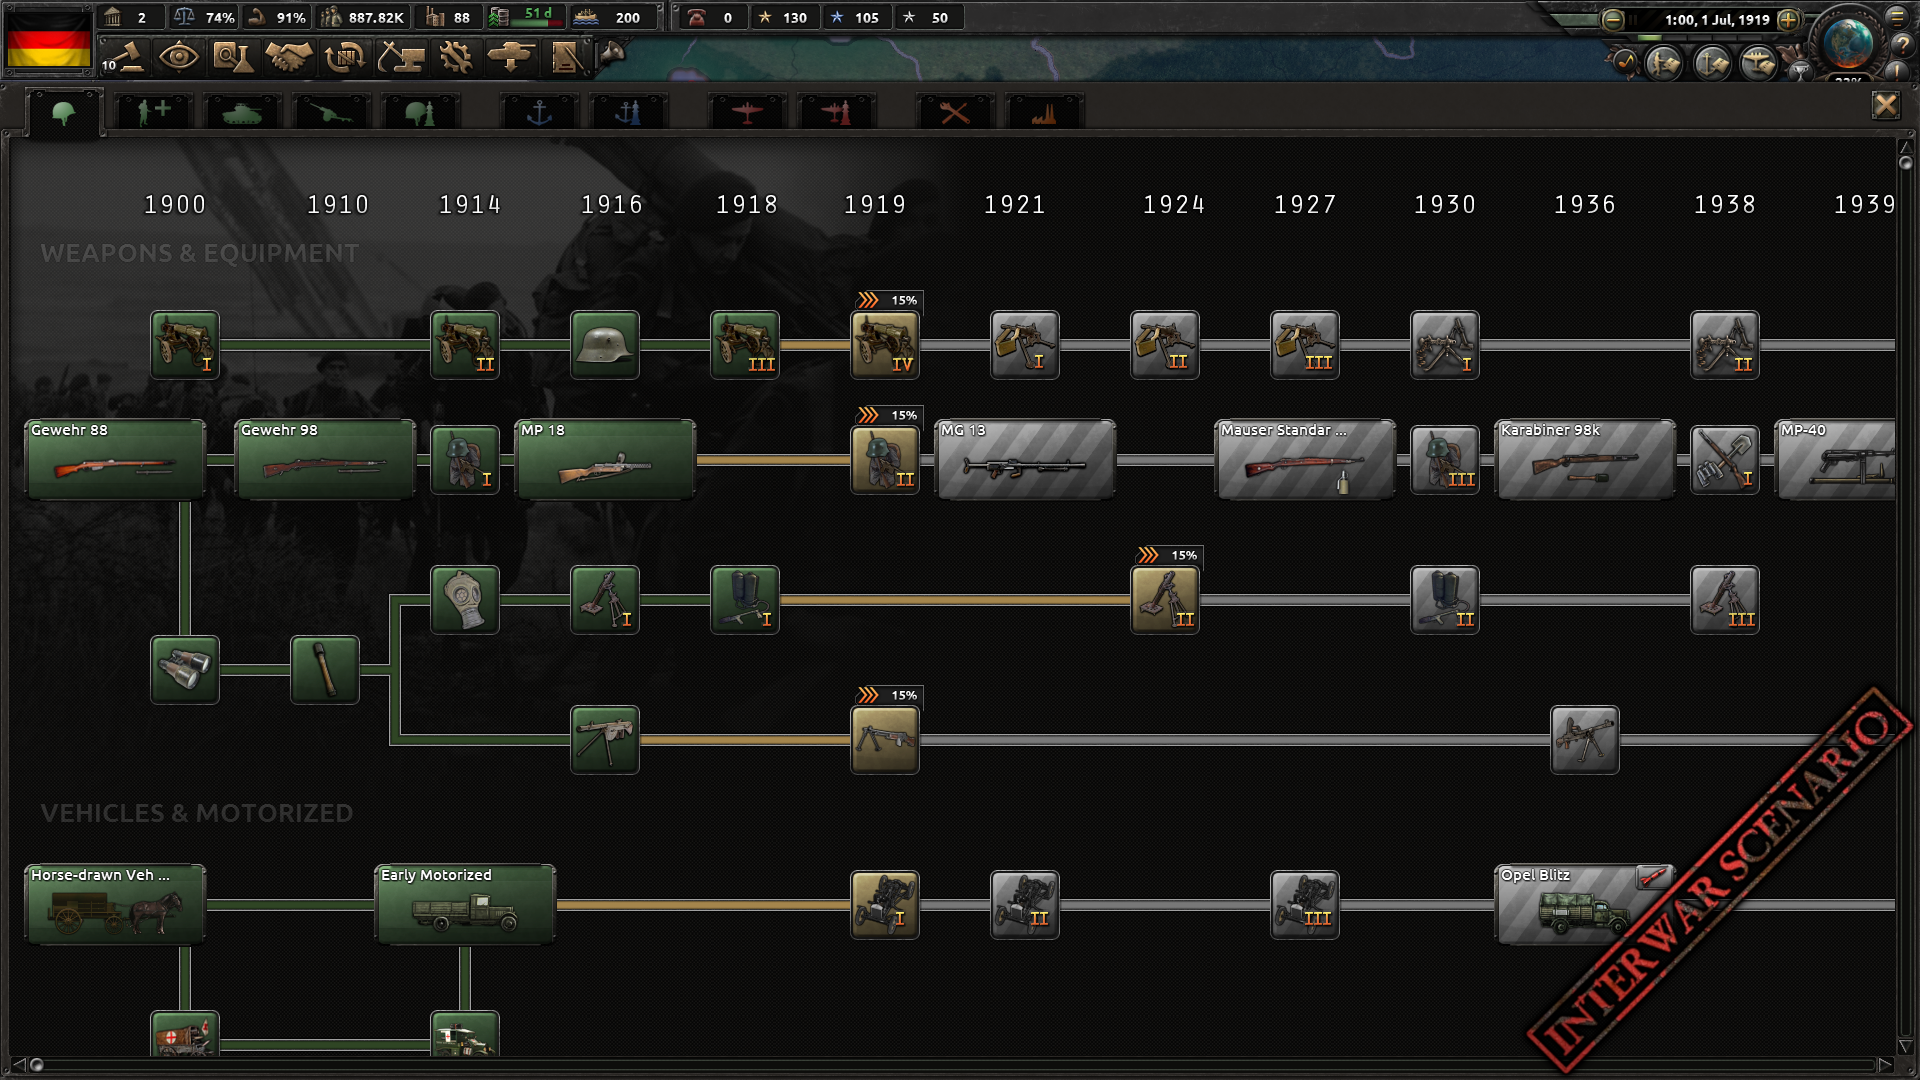 hearts of iron 4 minimum requirements